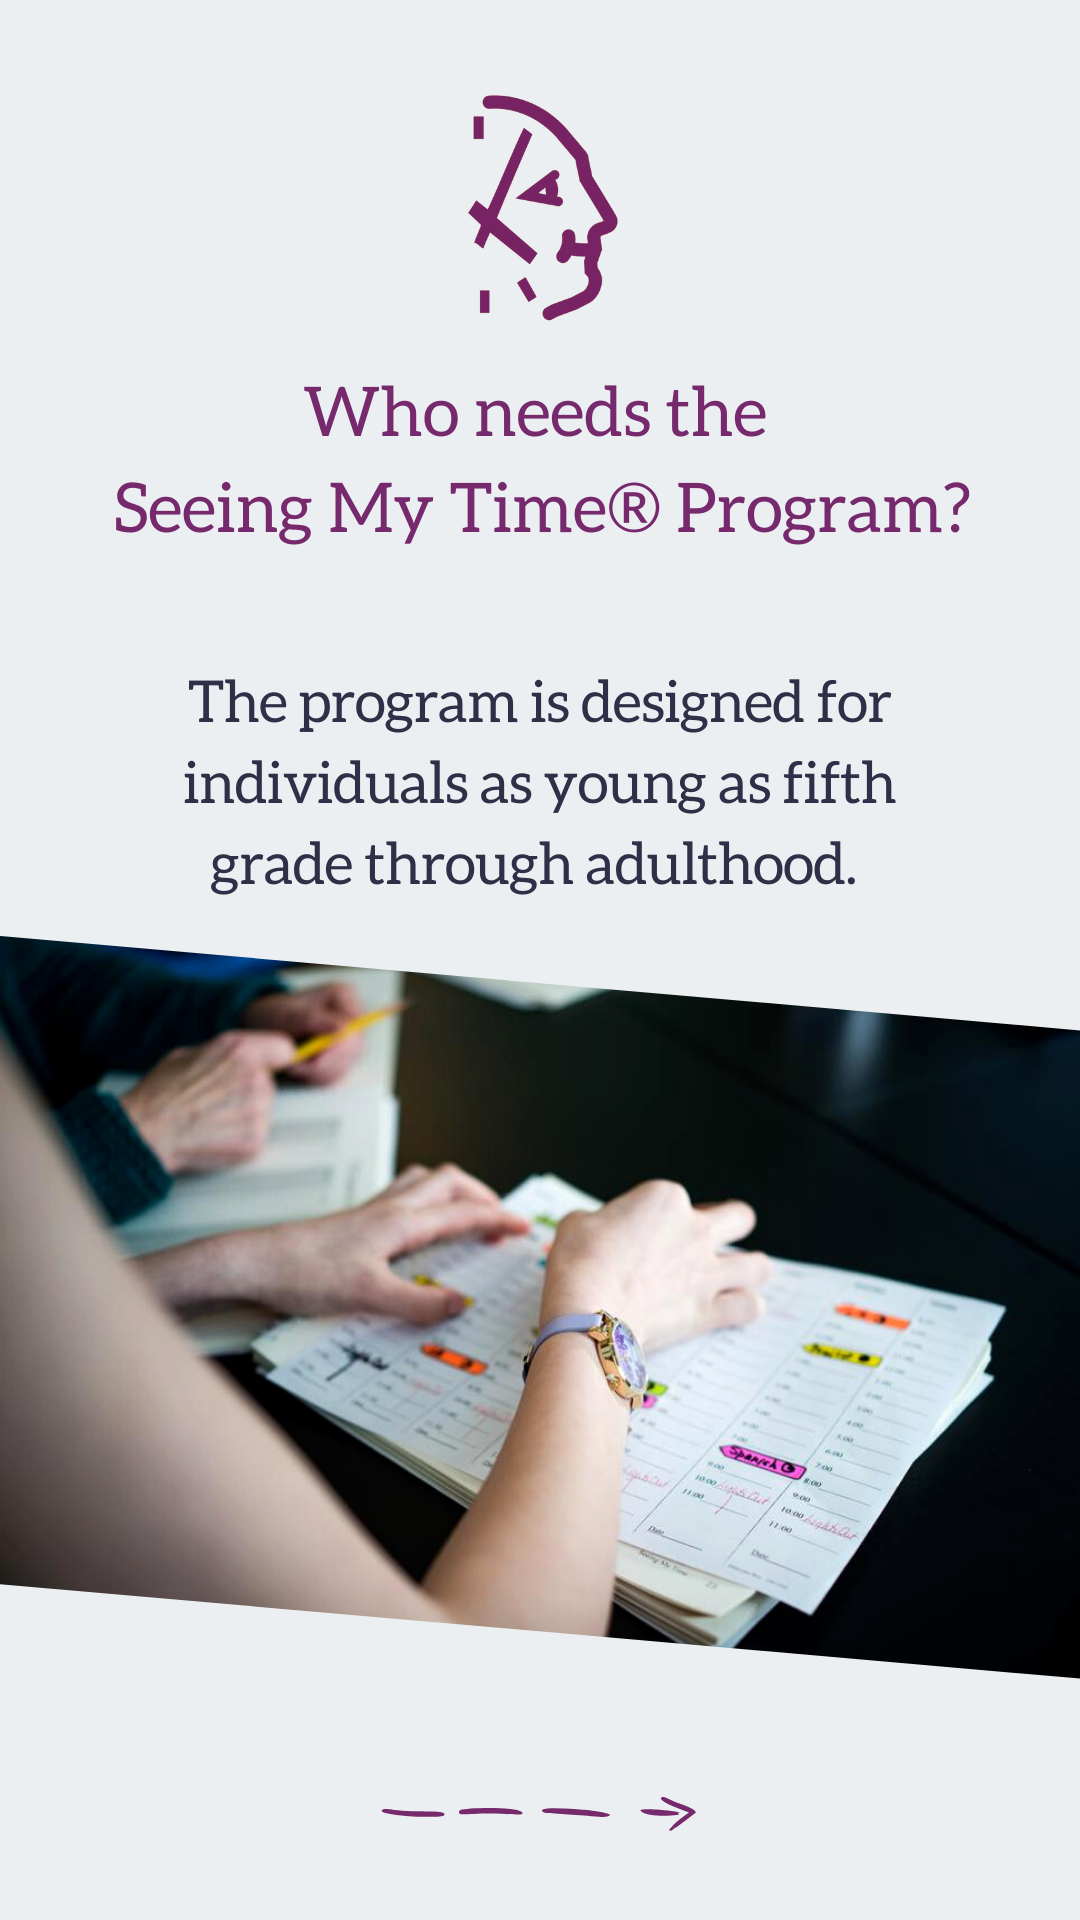 Instagram Story Highlights for marketing professional organizer The Seeing My Time Program by Executive Functioning Success 